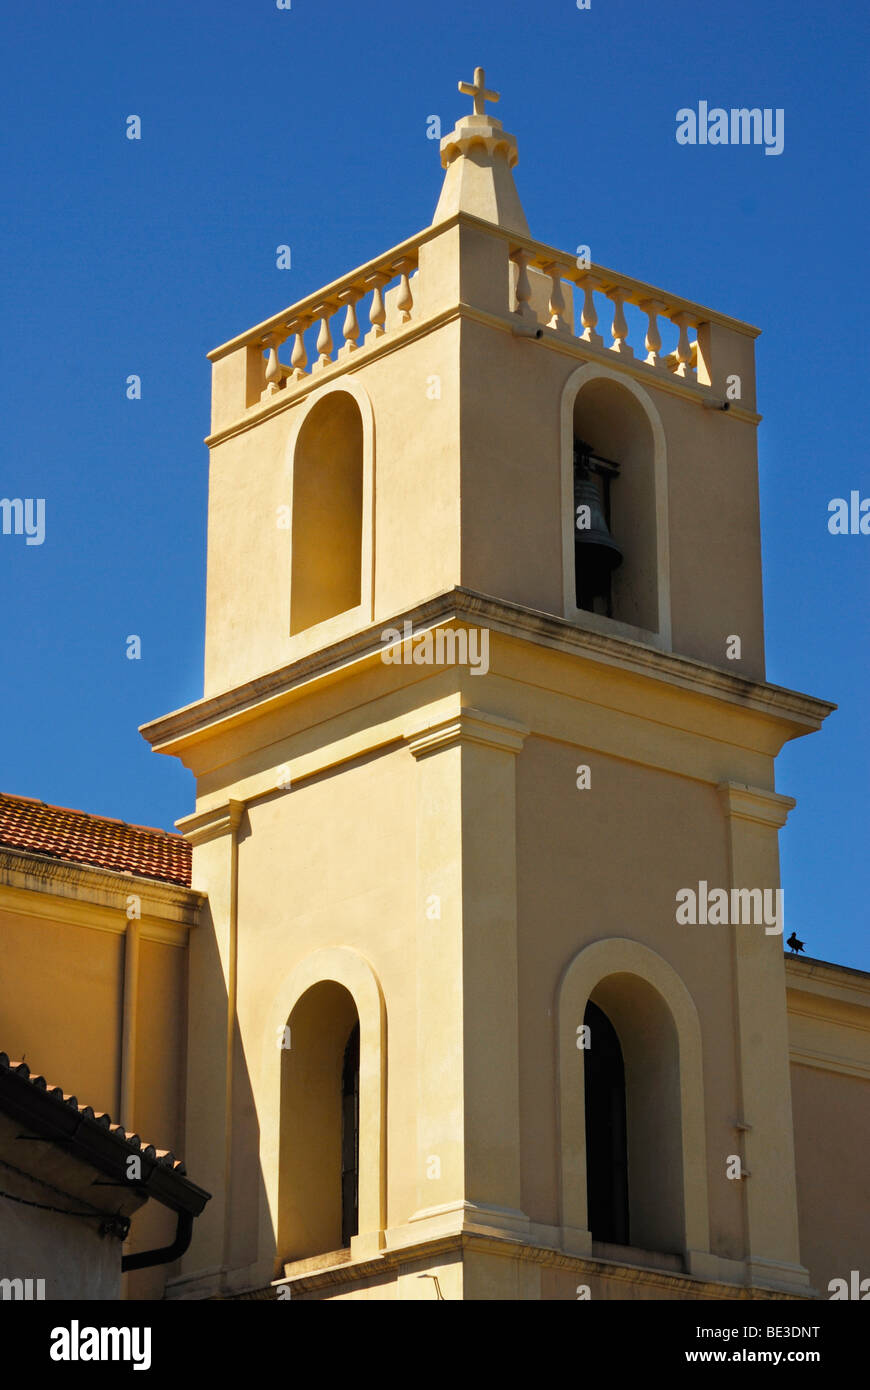 Baroque bell tower, bell and gallery, Calabria, South Italy, Europe Stock Photo